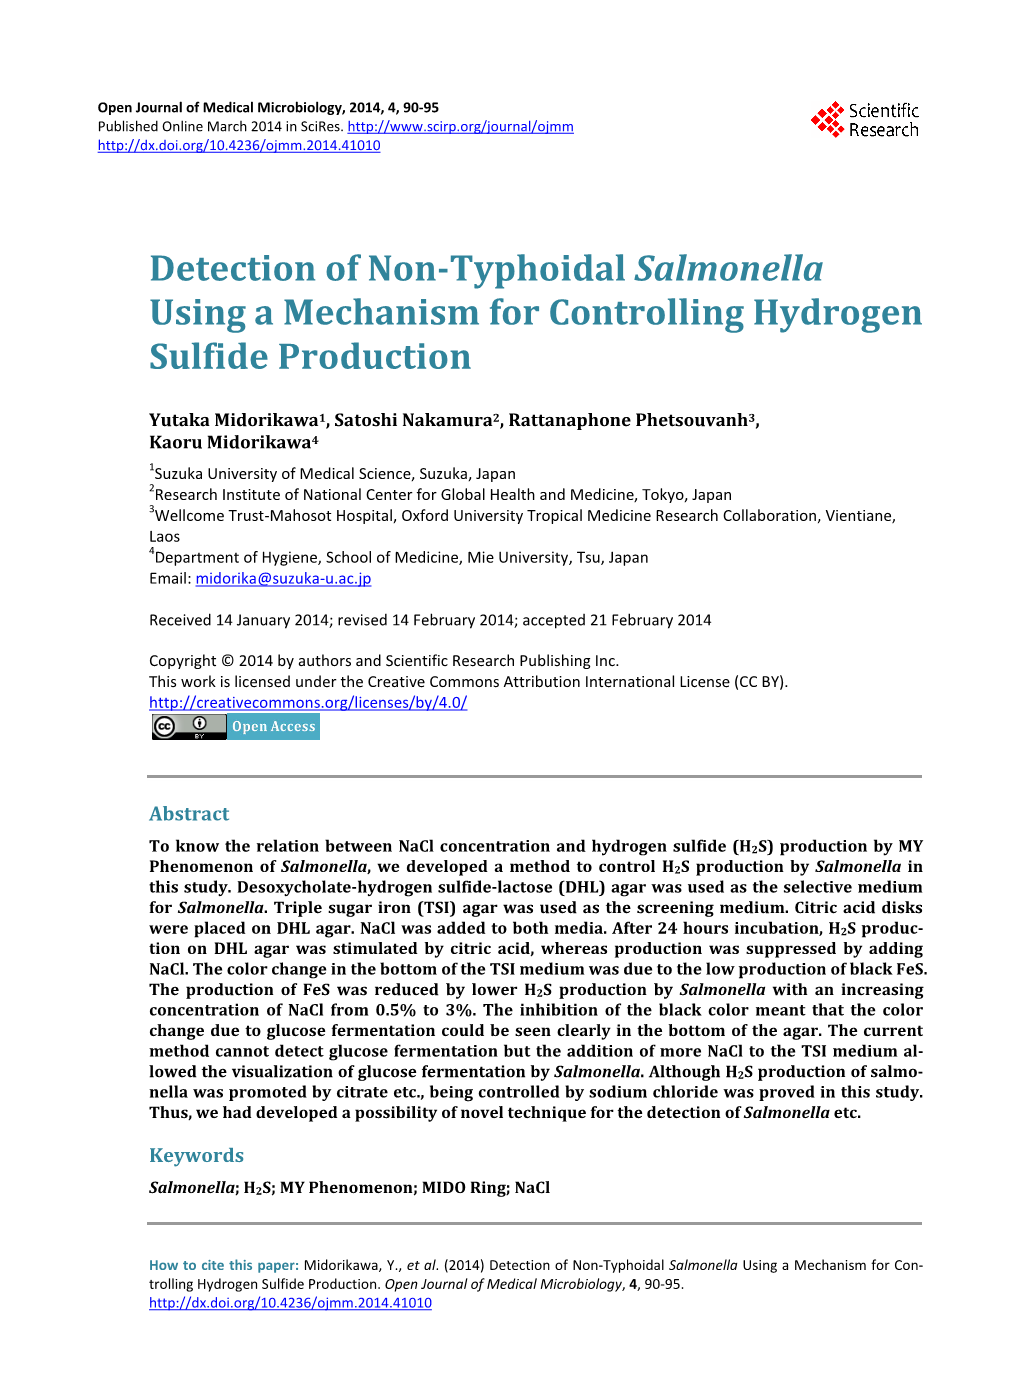 Detection of Non-Typhoidal Salmonella Using a Mechanism for Controlling Hydrogen Sulfide Production